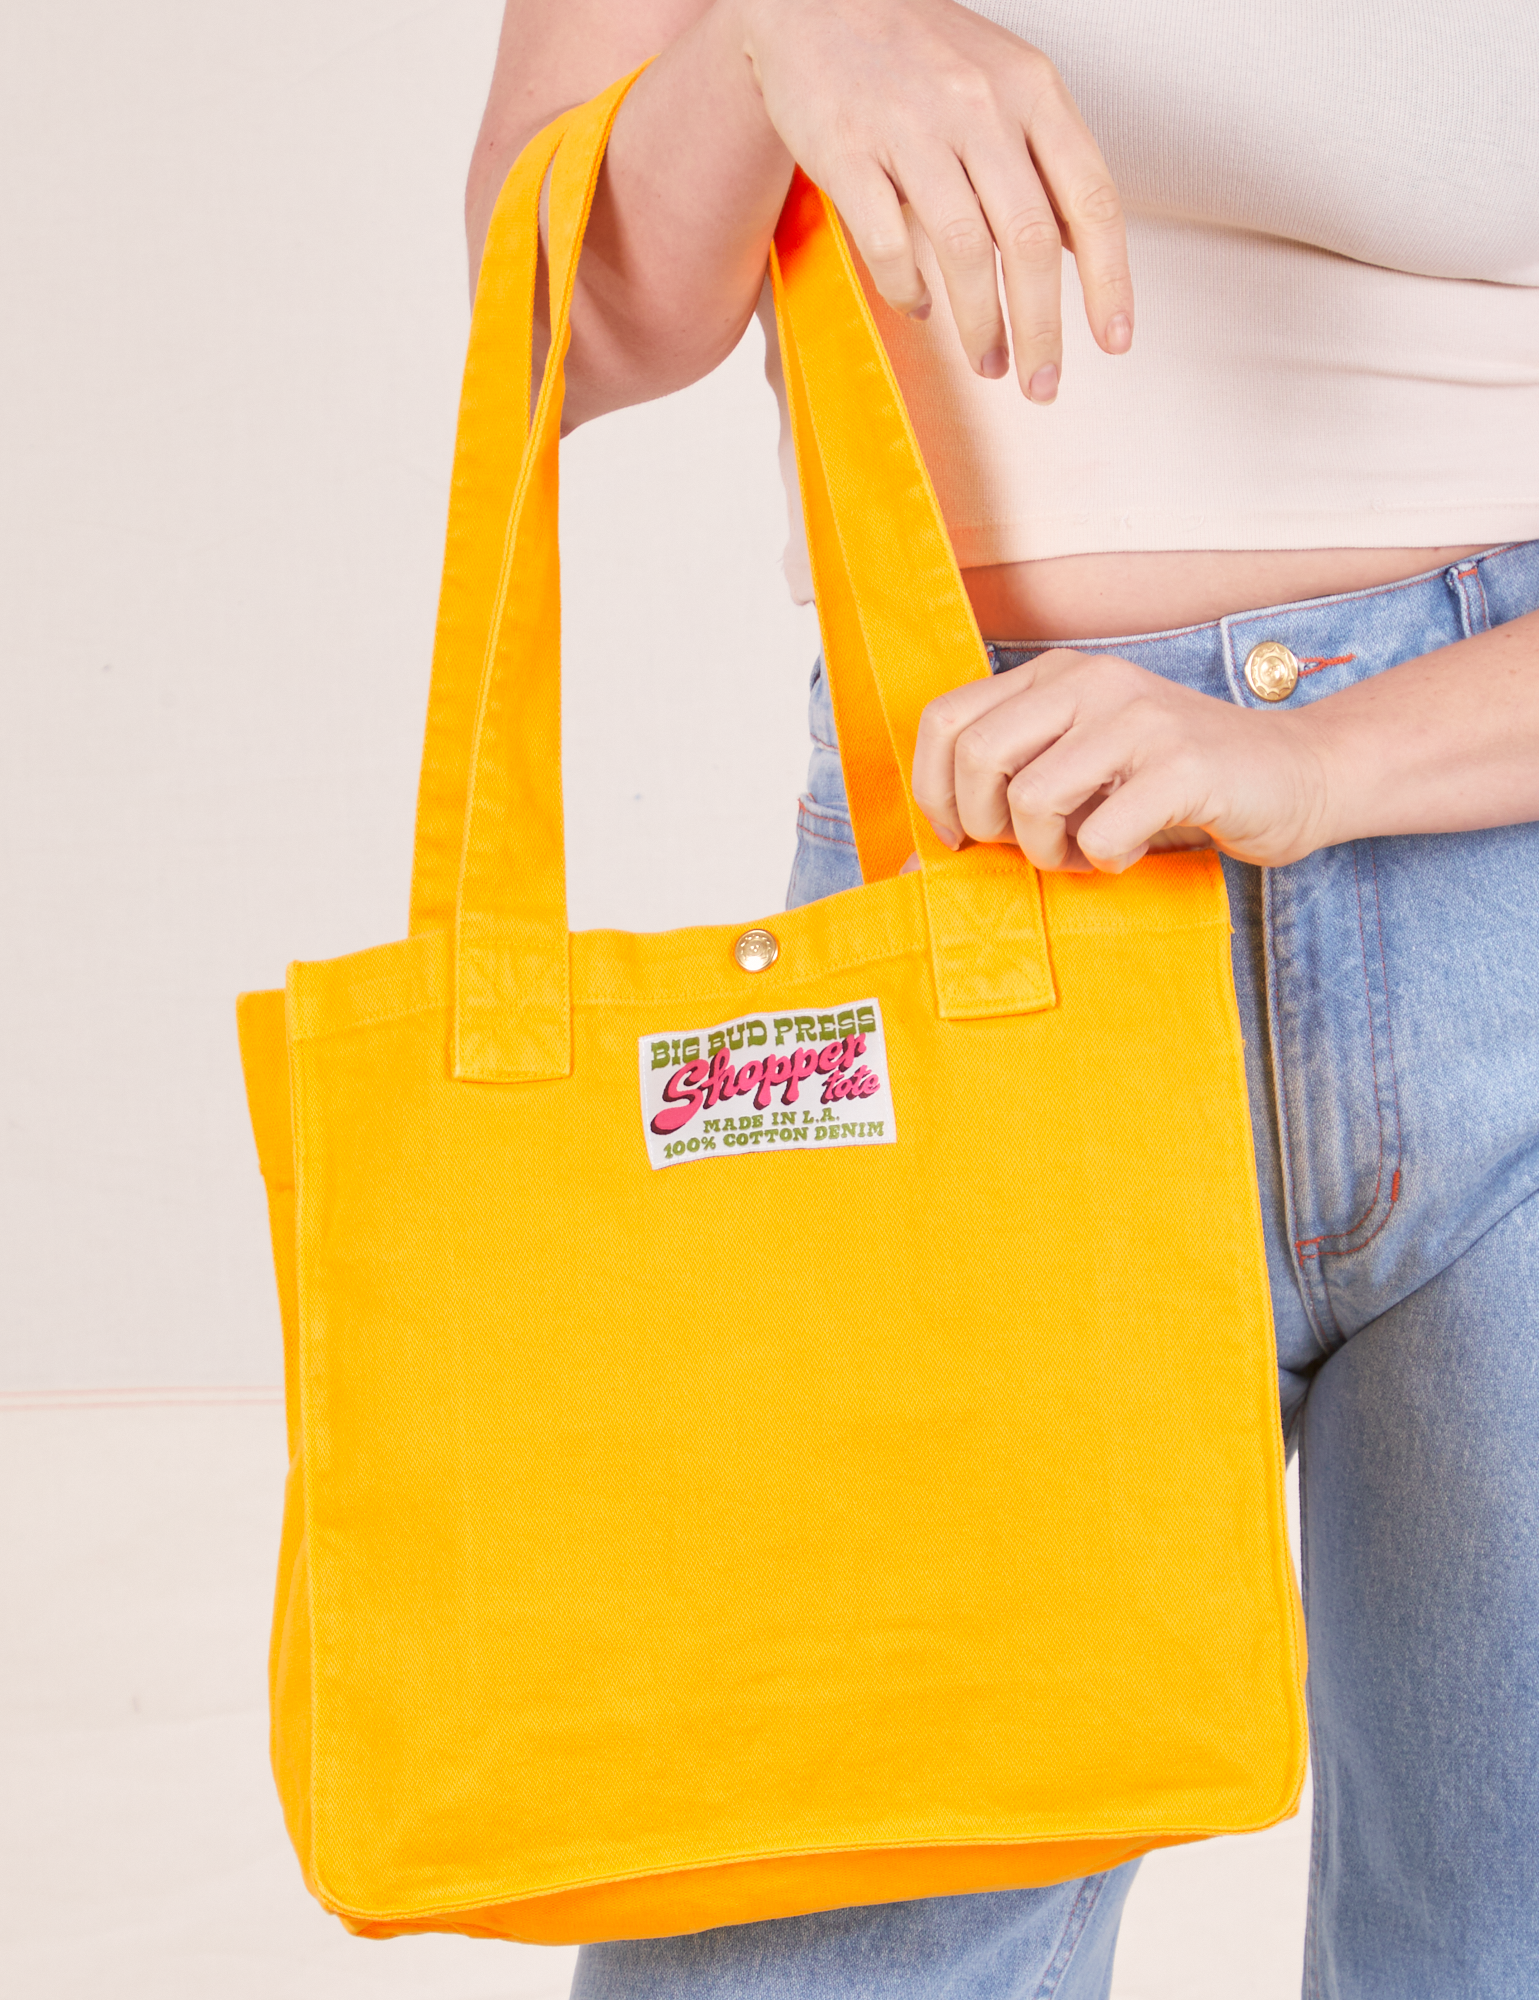 Shopper Tote Bag in Sunshine Yellow worn on arm of Allison